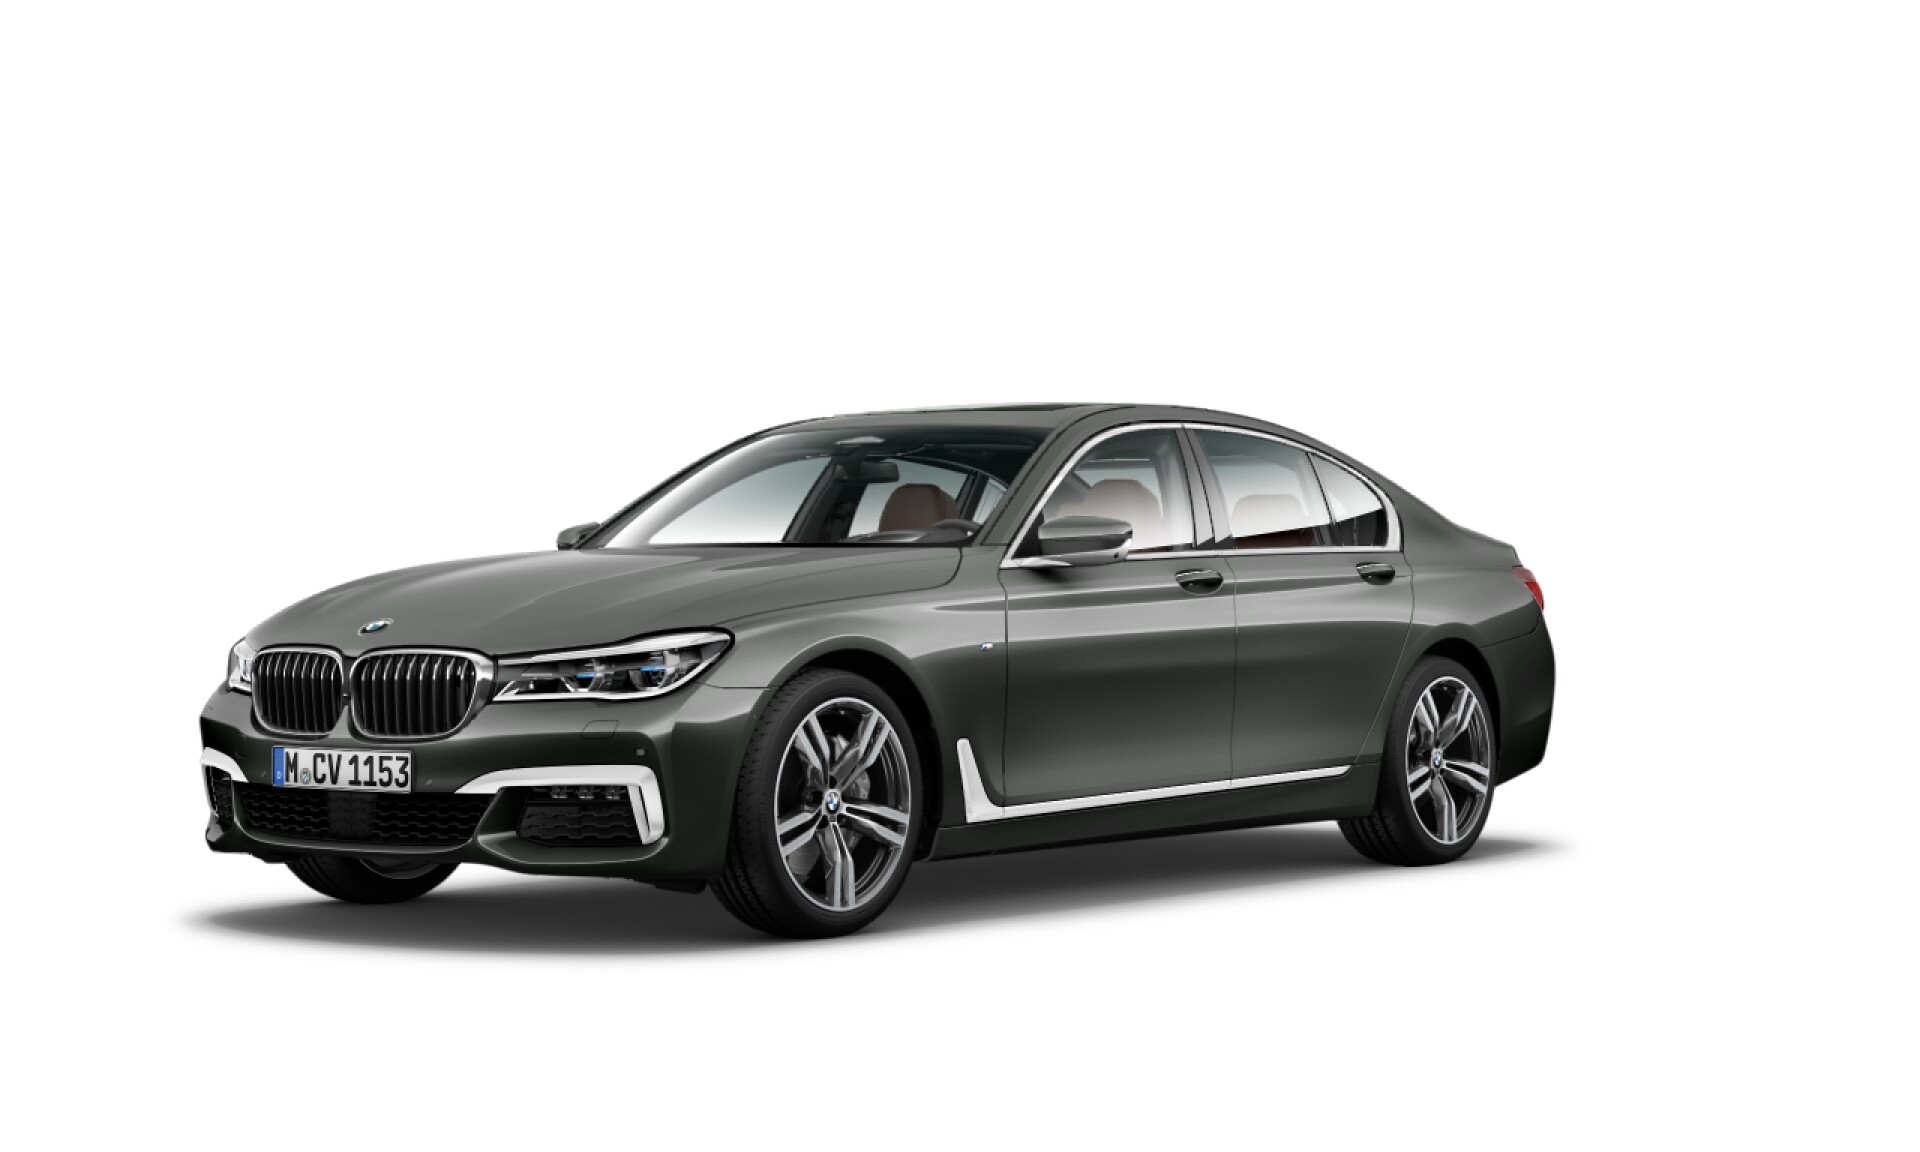 2016 BMW 7 Series  for sale - 104283